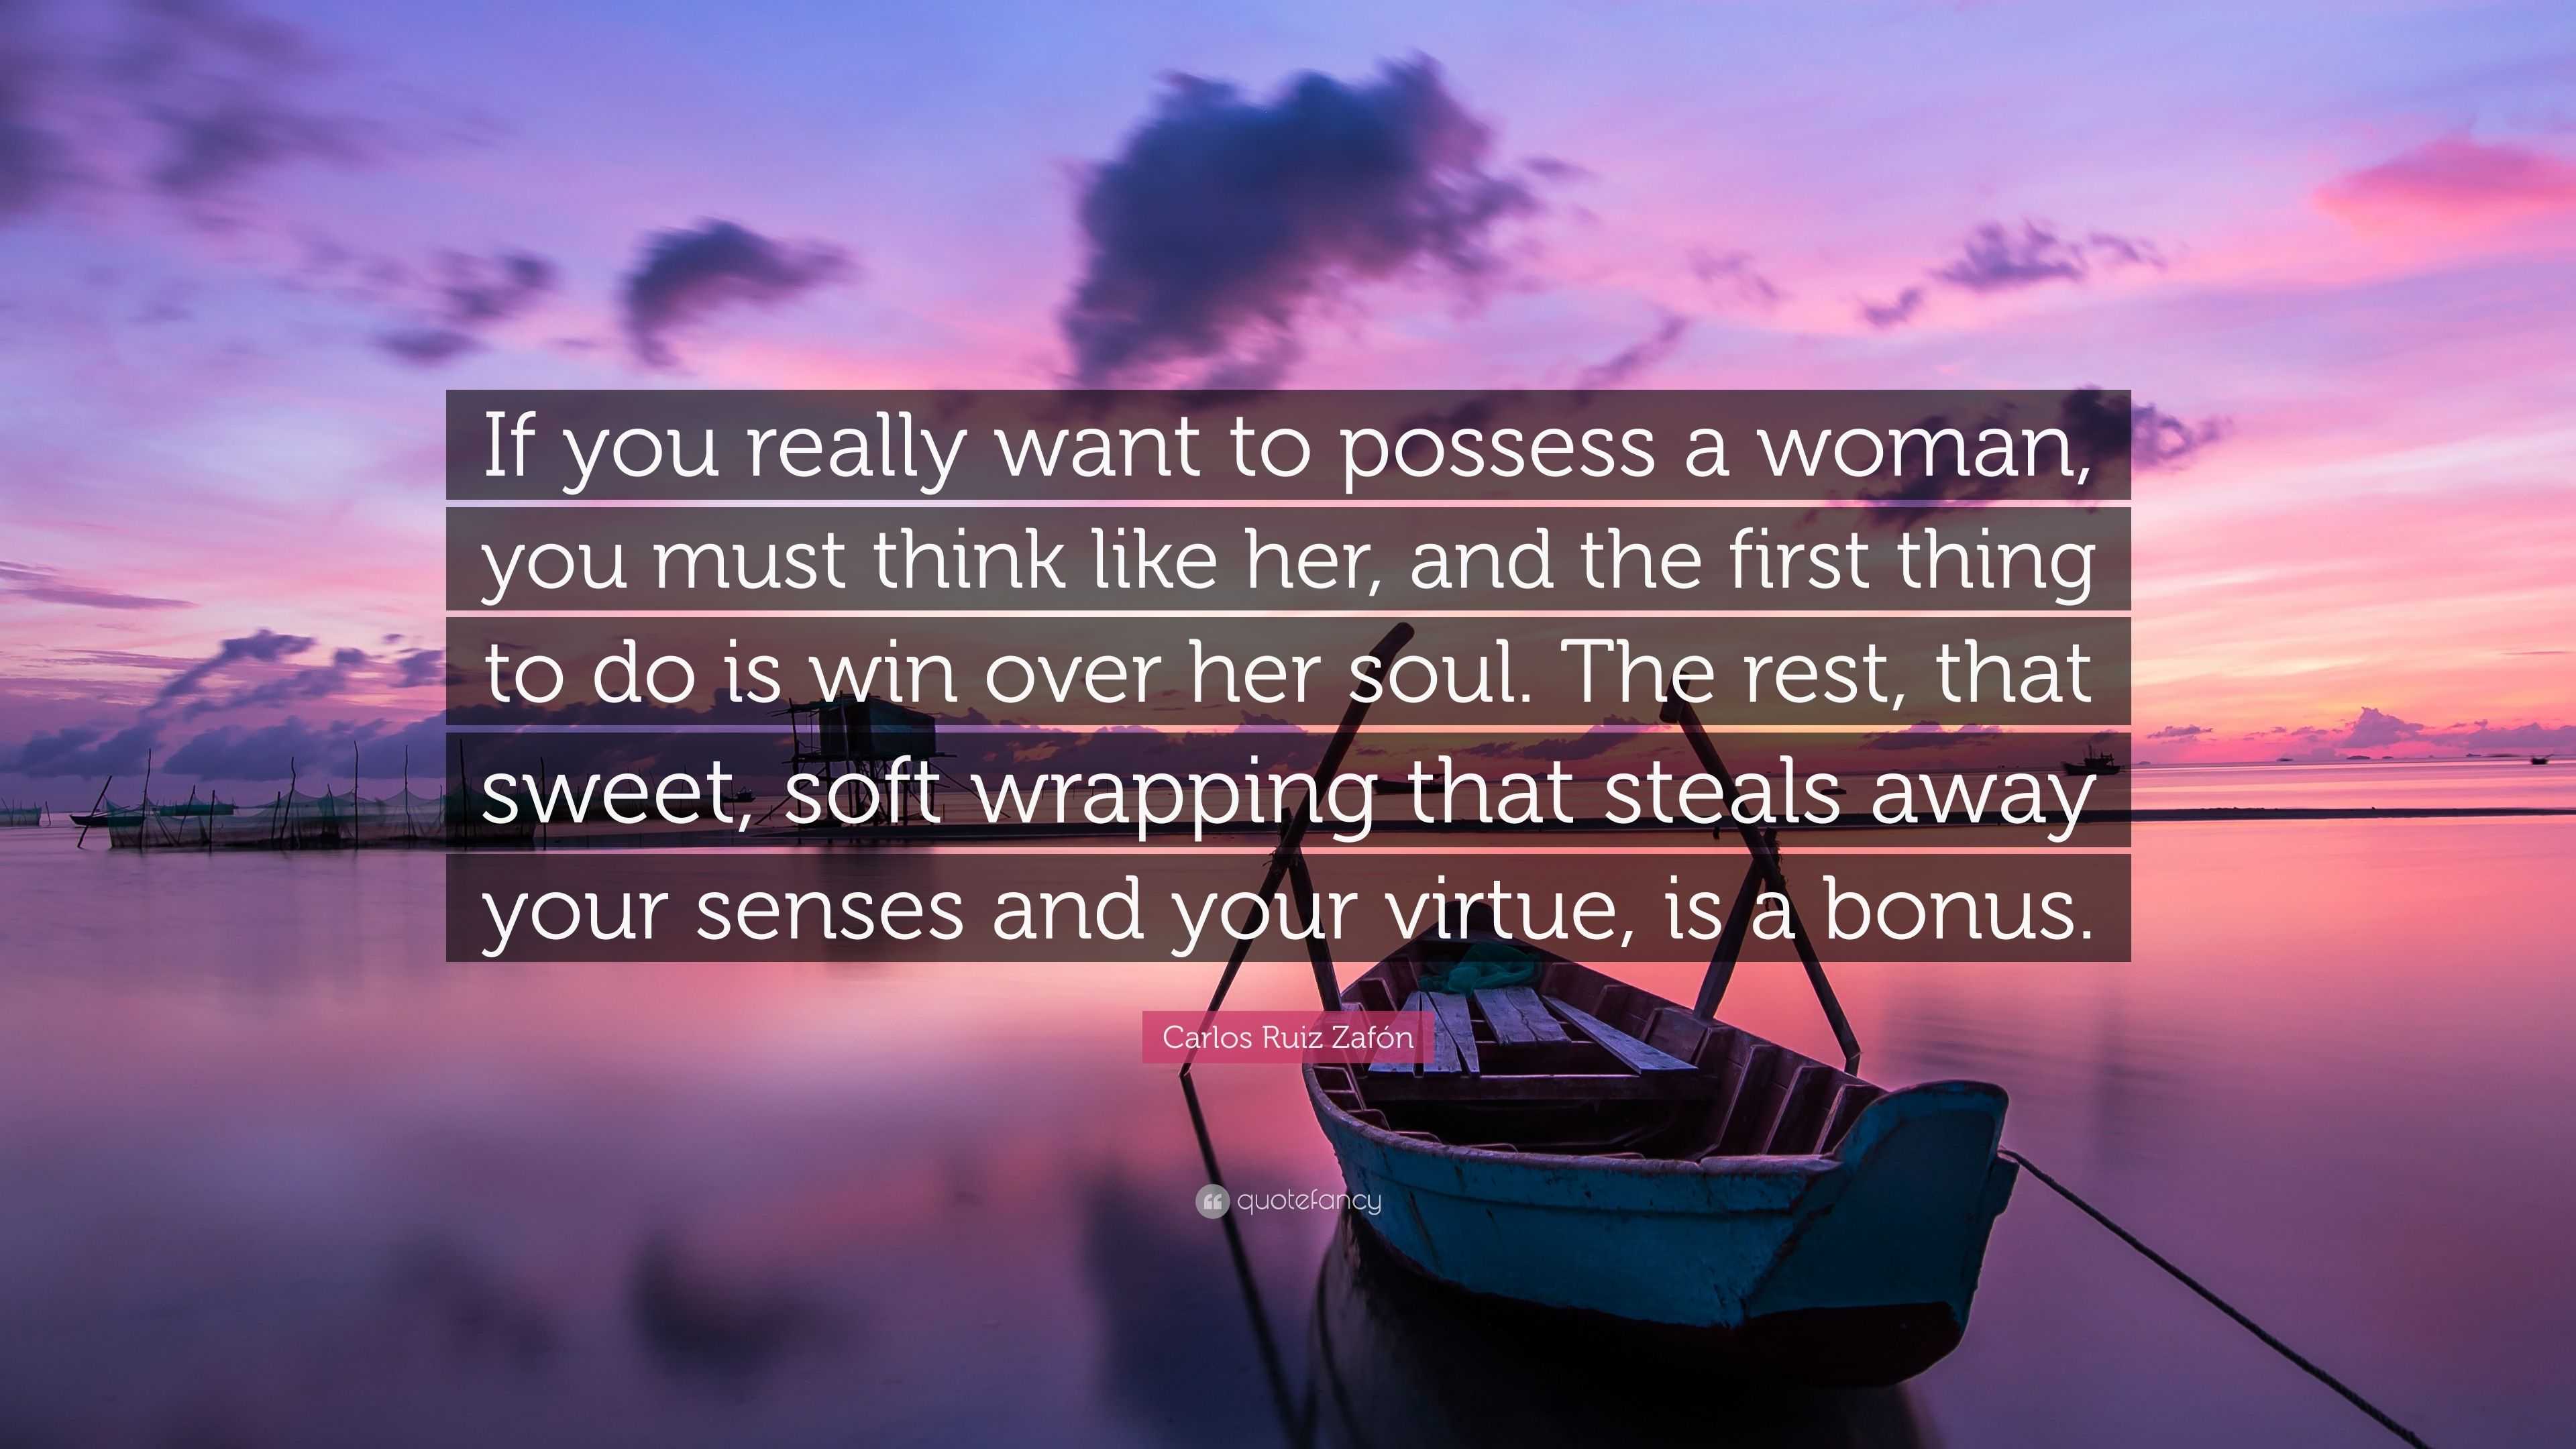 Carlos Ruiz Zafón Quote: “If you really want to possess a woman, you ...